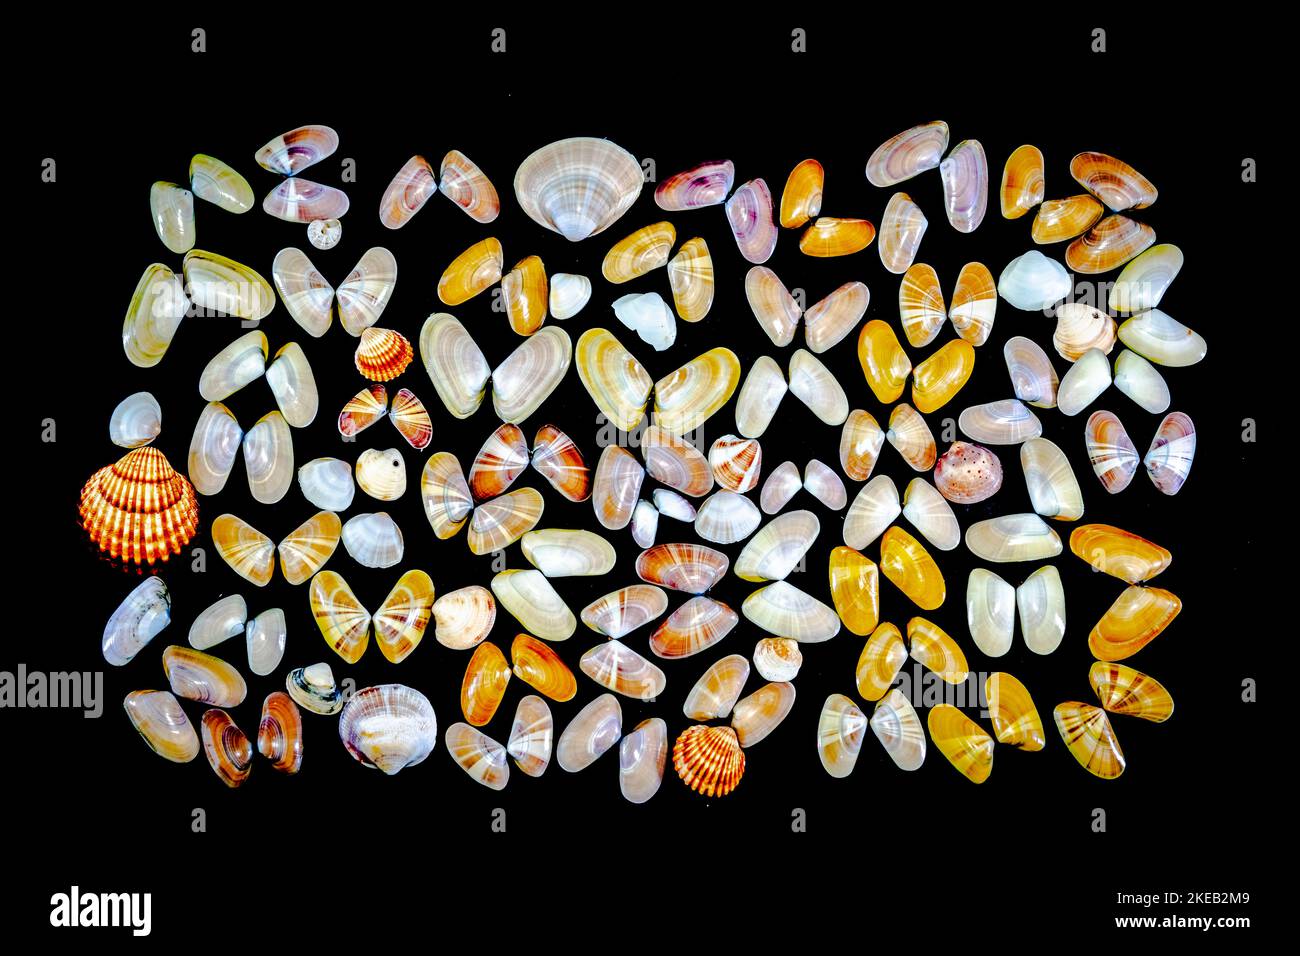 Collection of Donax Variabilis or coquina saltwater clam mollusc opened shells and seashells. Macro-photography in dark background of a variety of dif Stock Photo